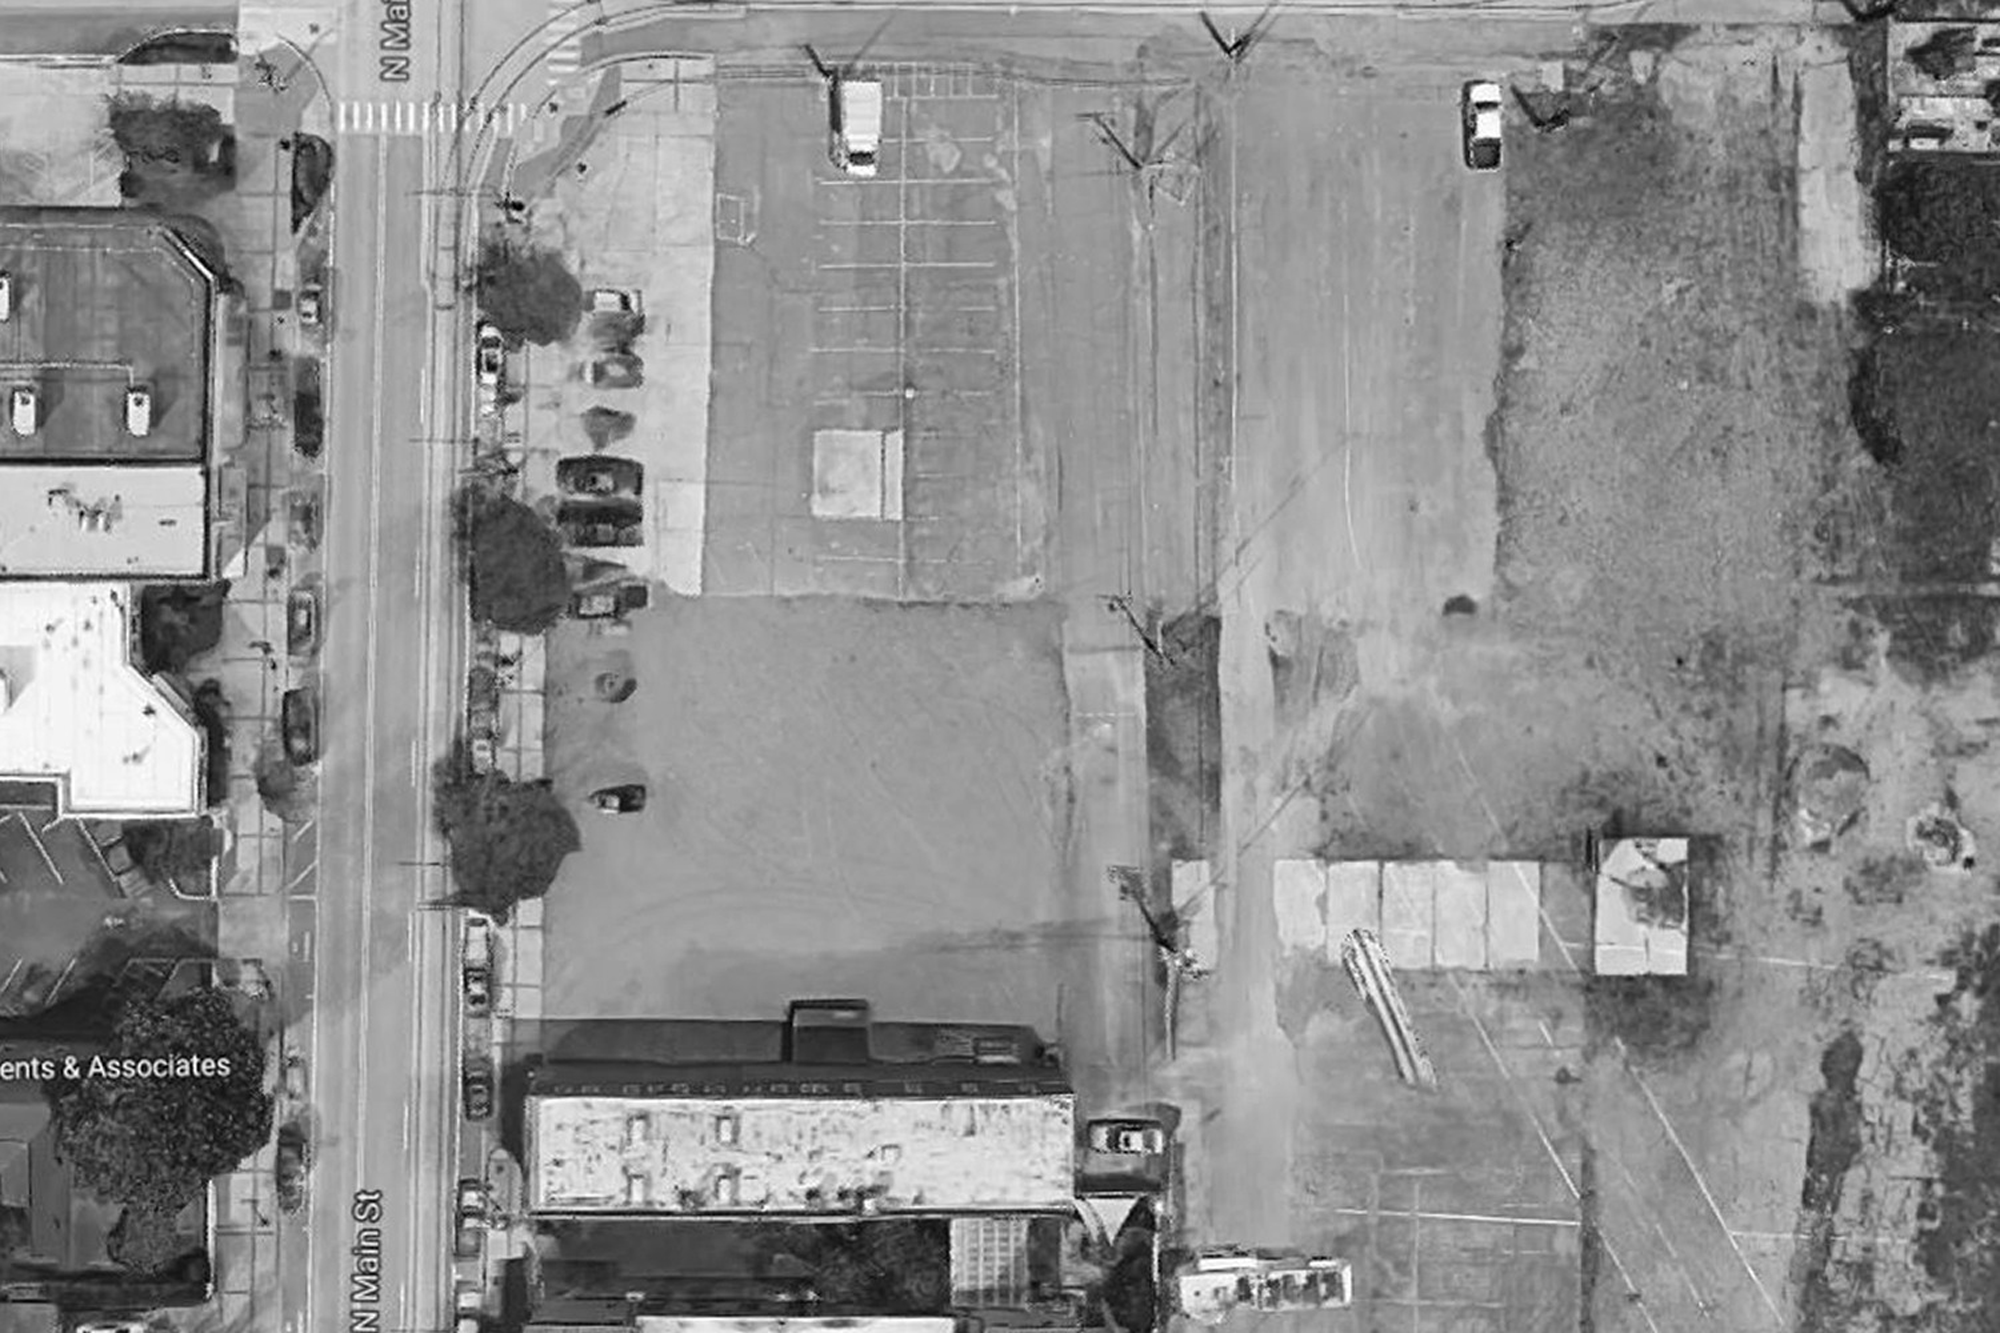 gif of site existing conditions switching between an aerial view and an on-the-ground photo